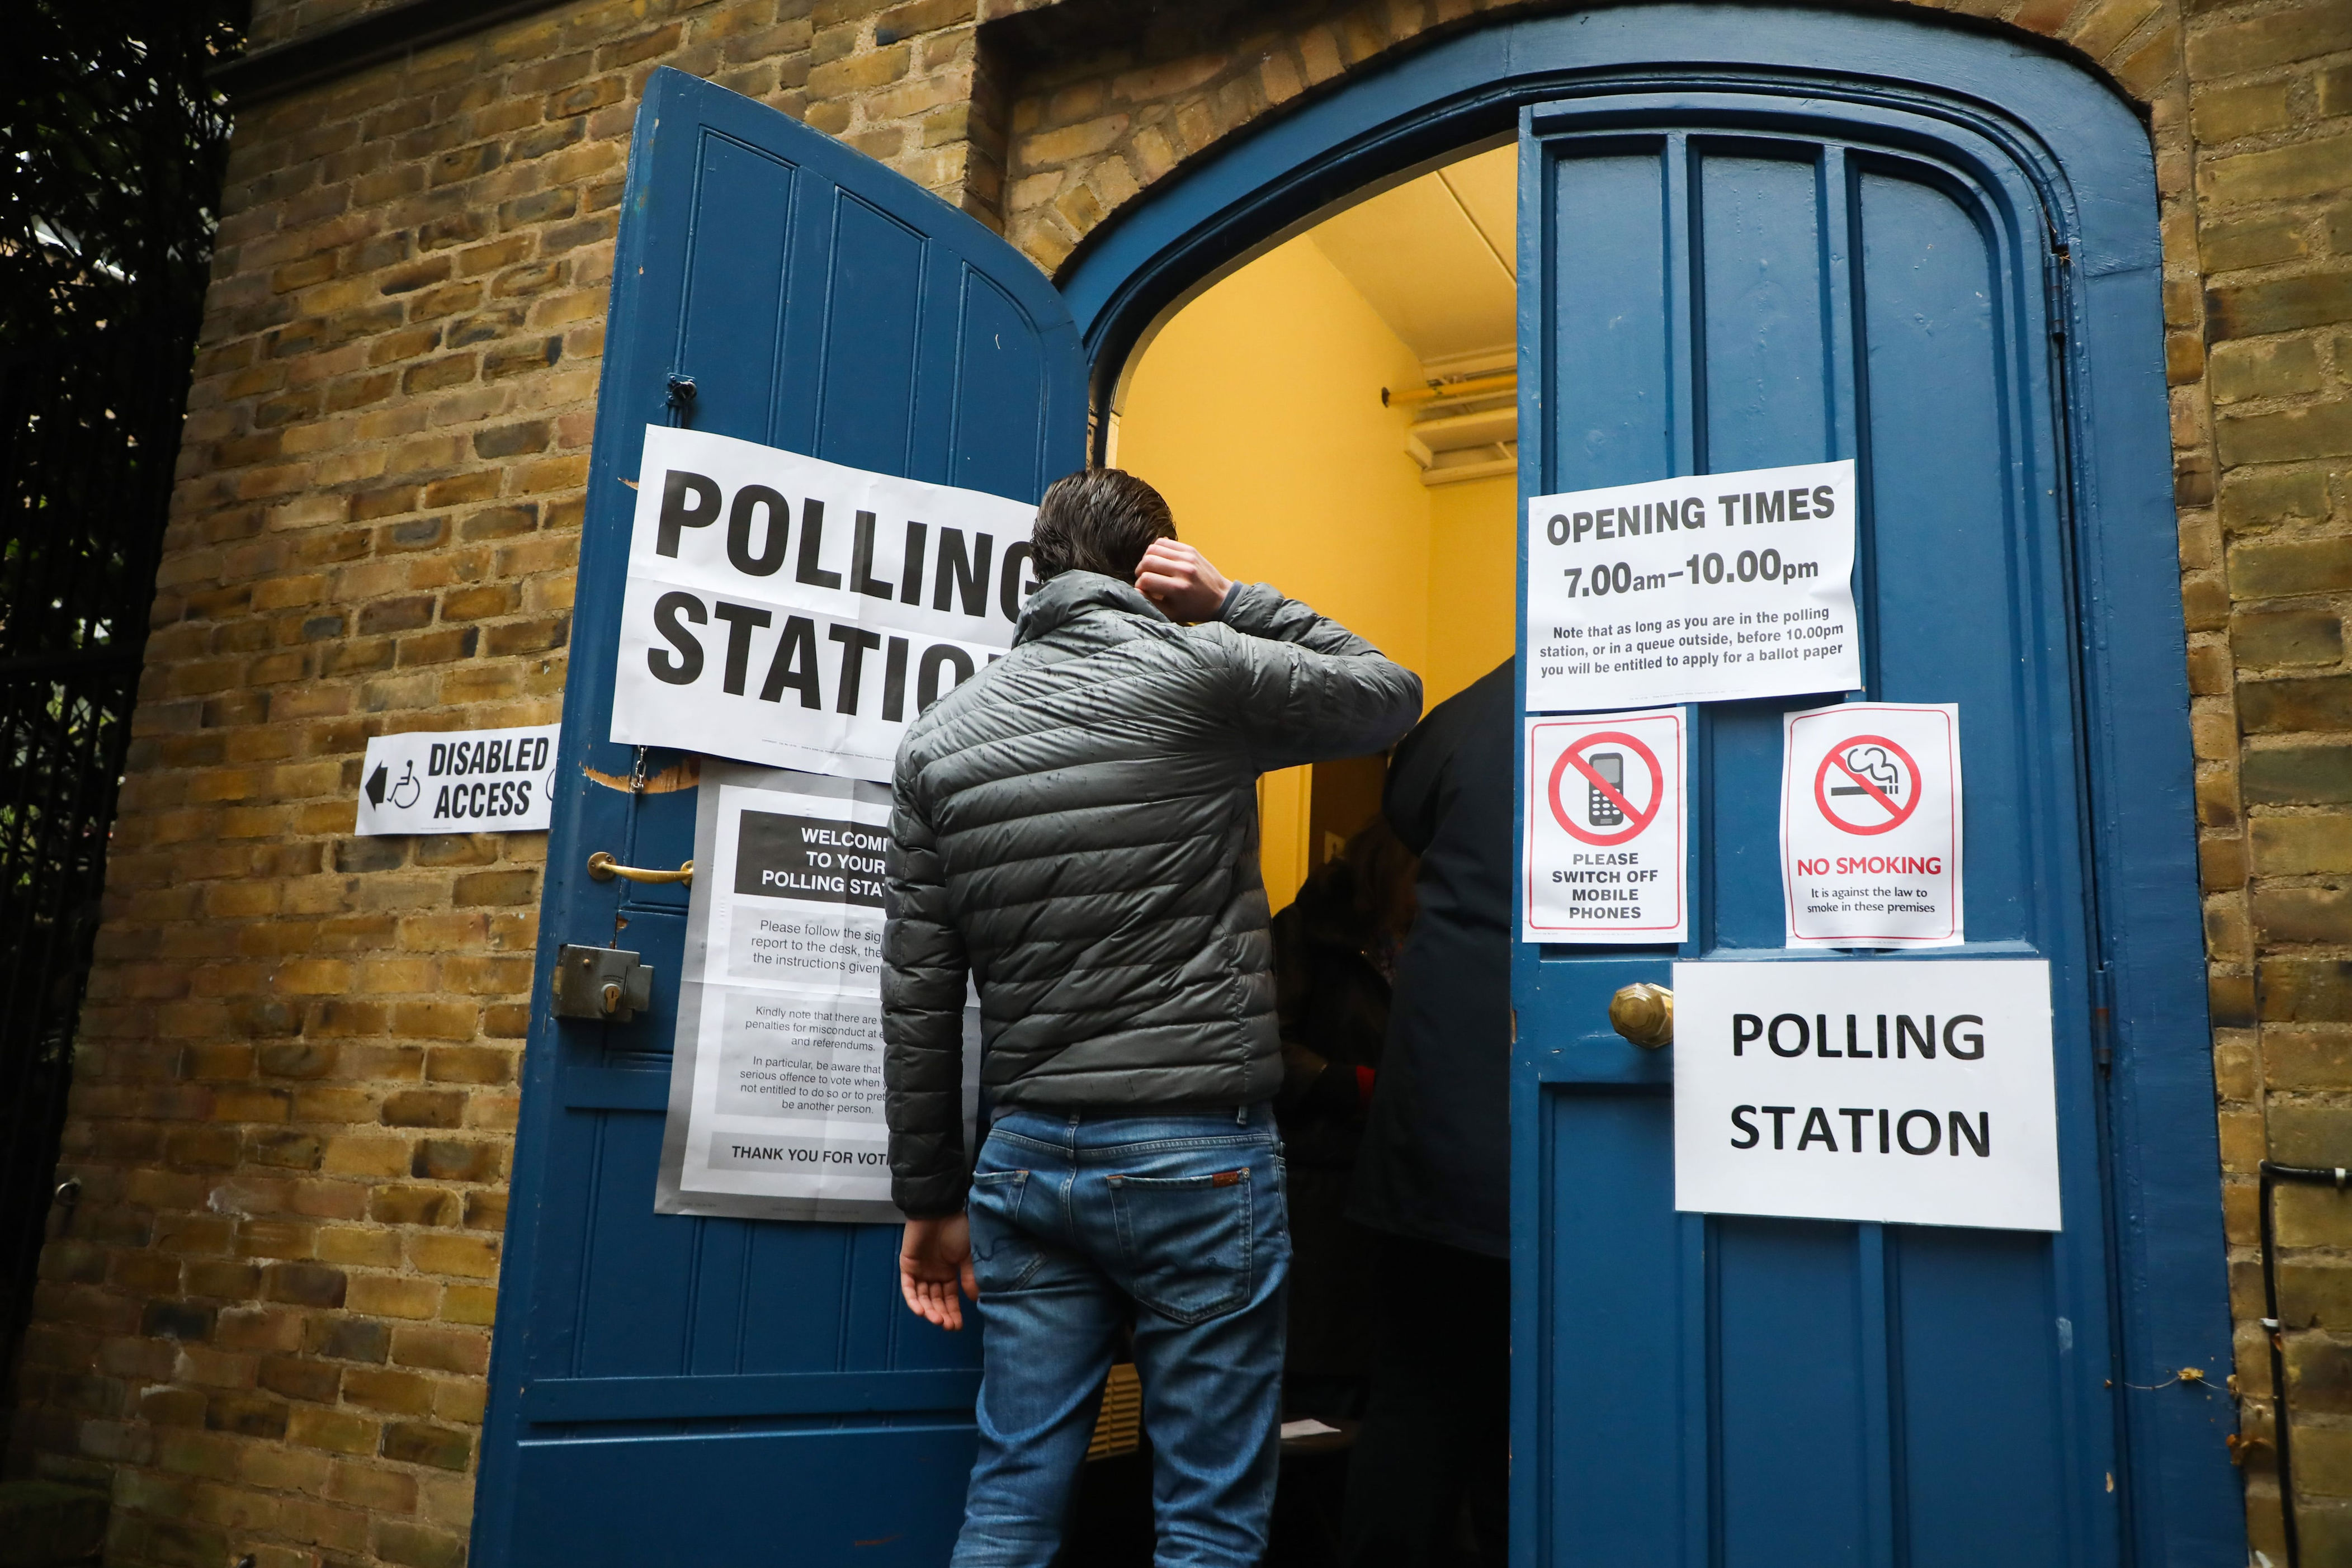 british expats in uae granted long-term rights to vote in general elections